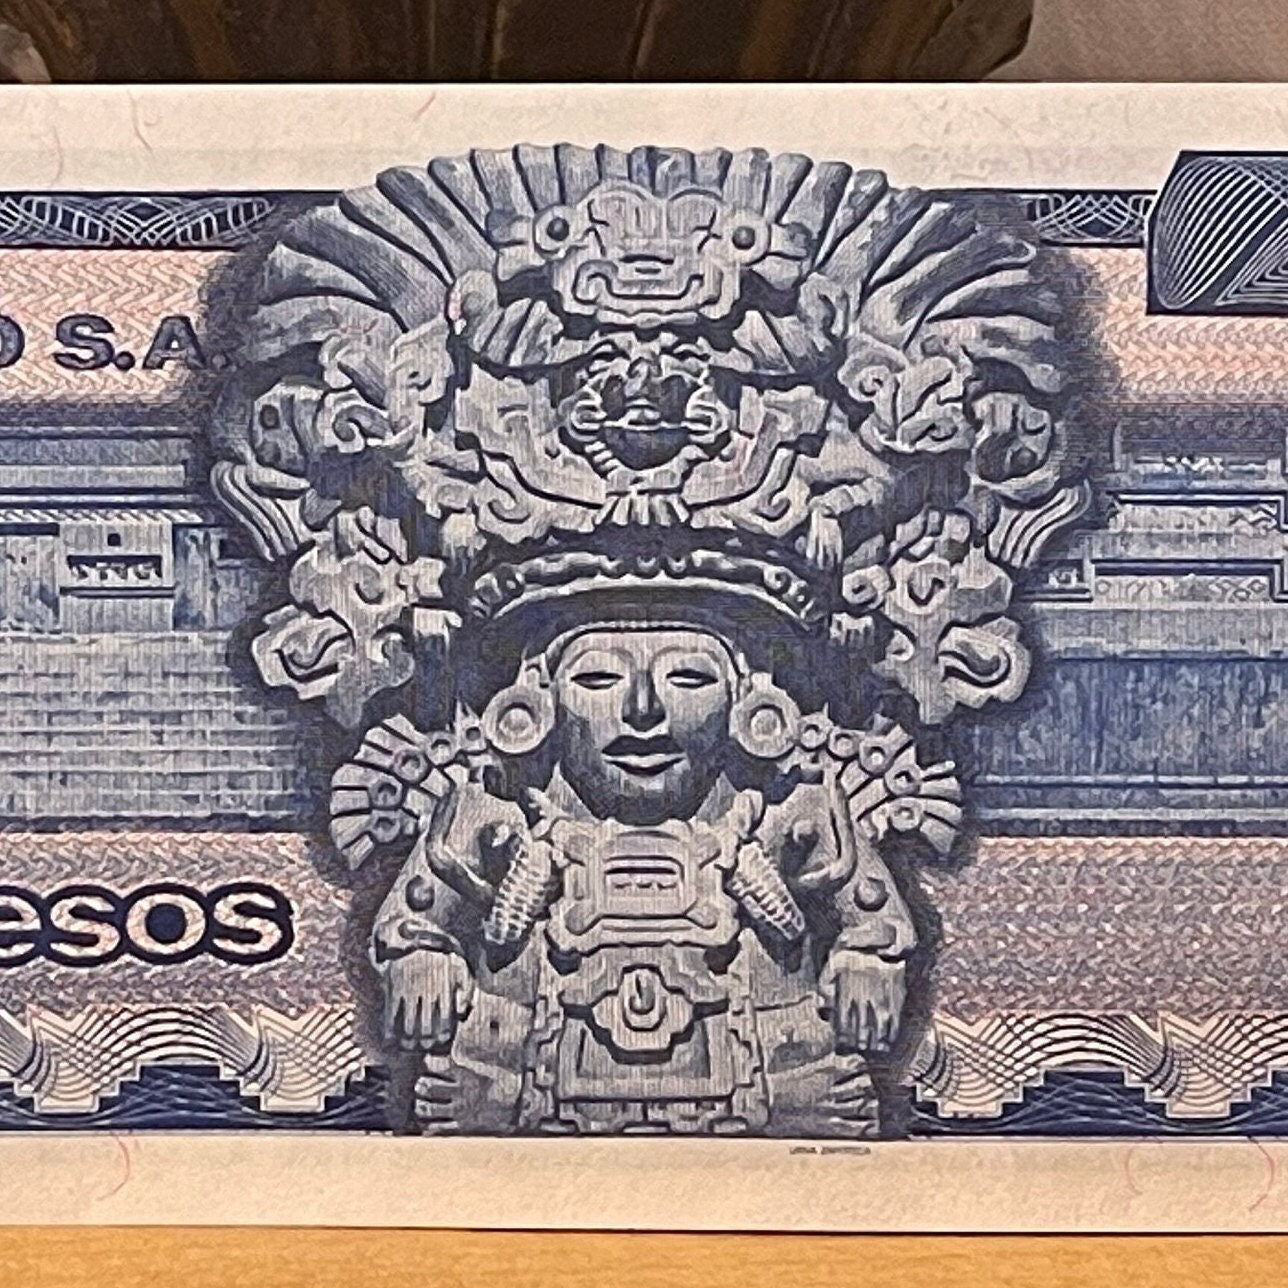 Paper Money Banknotes